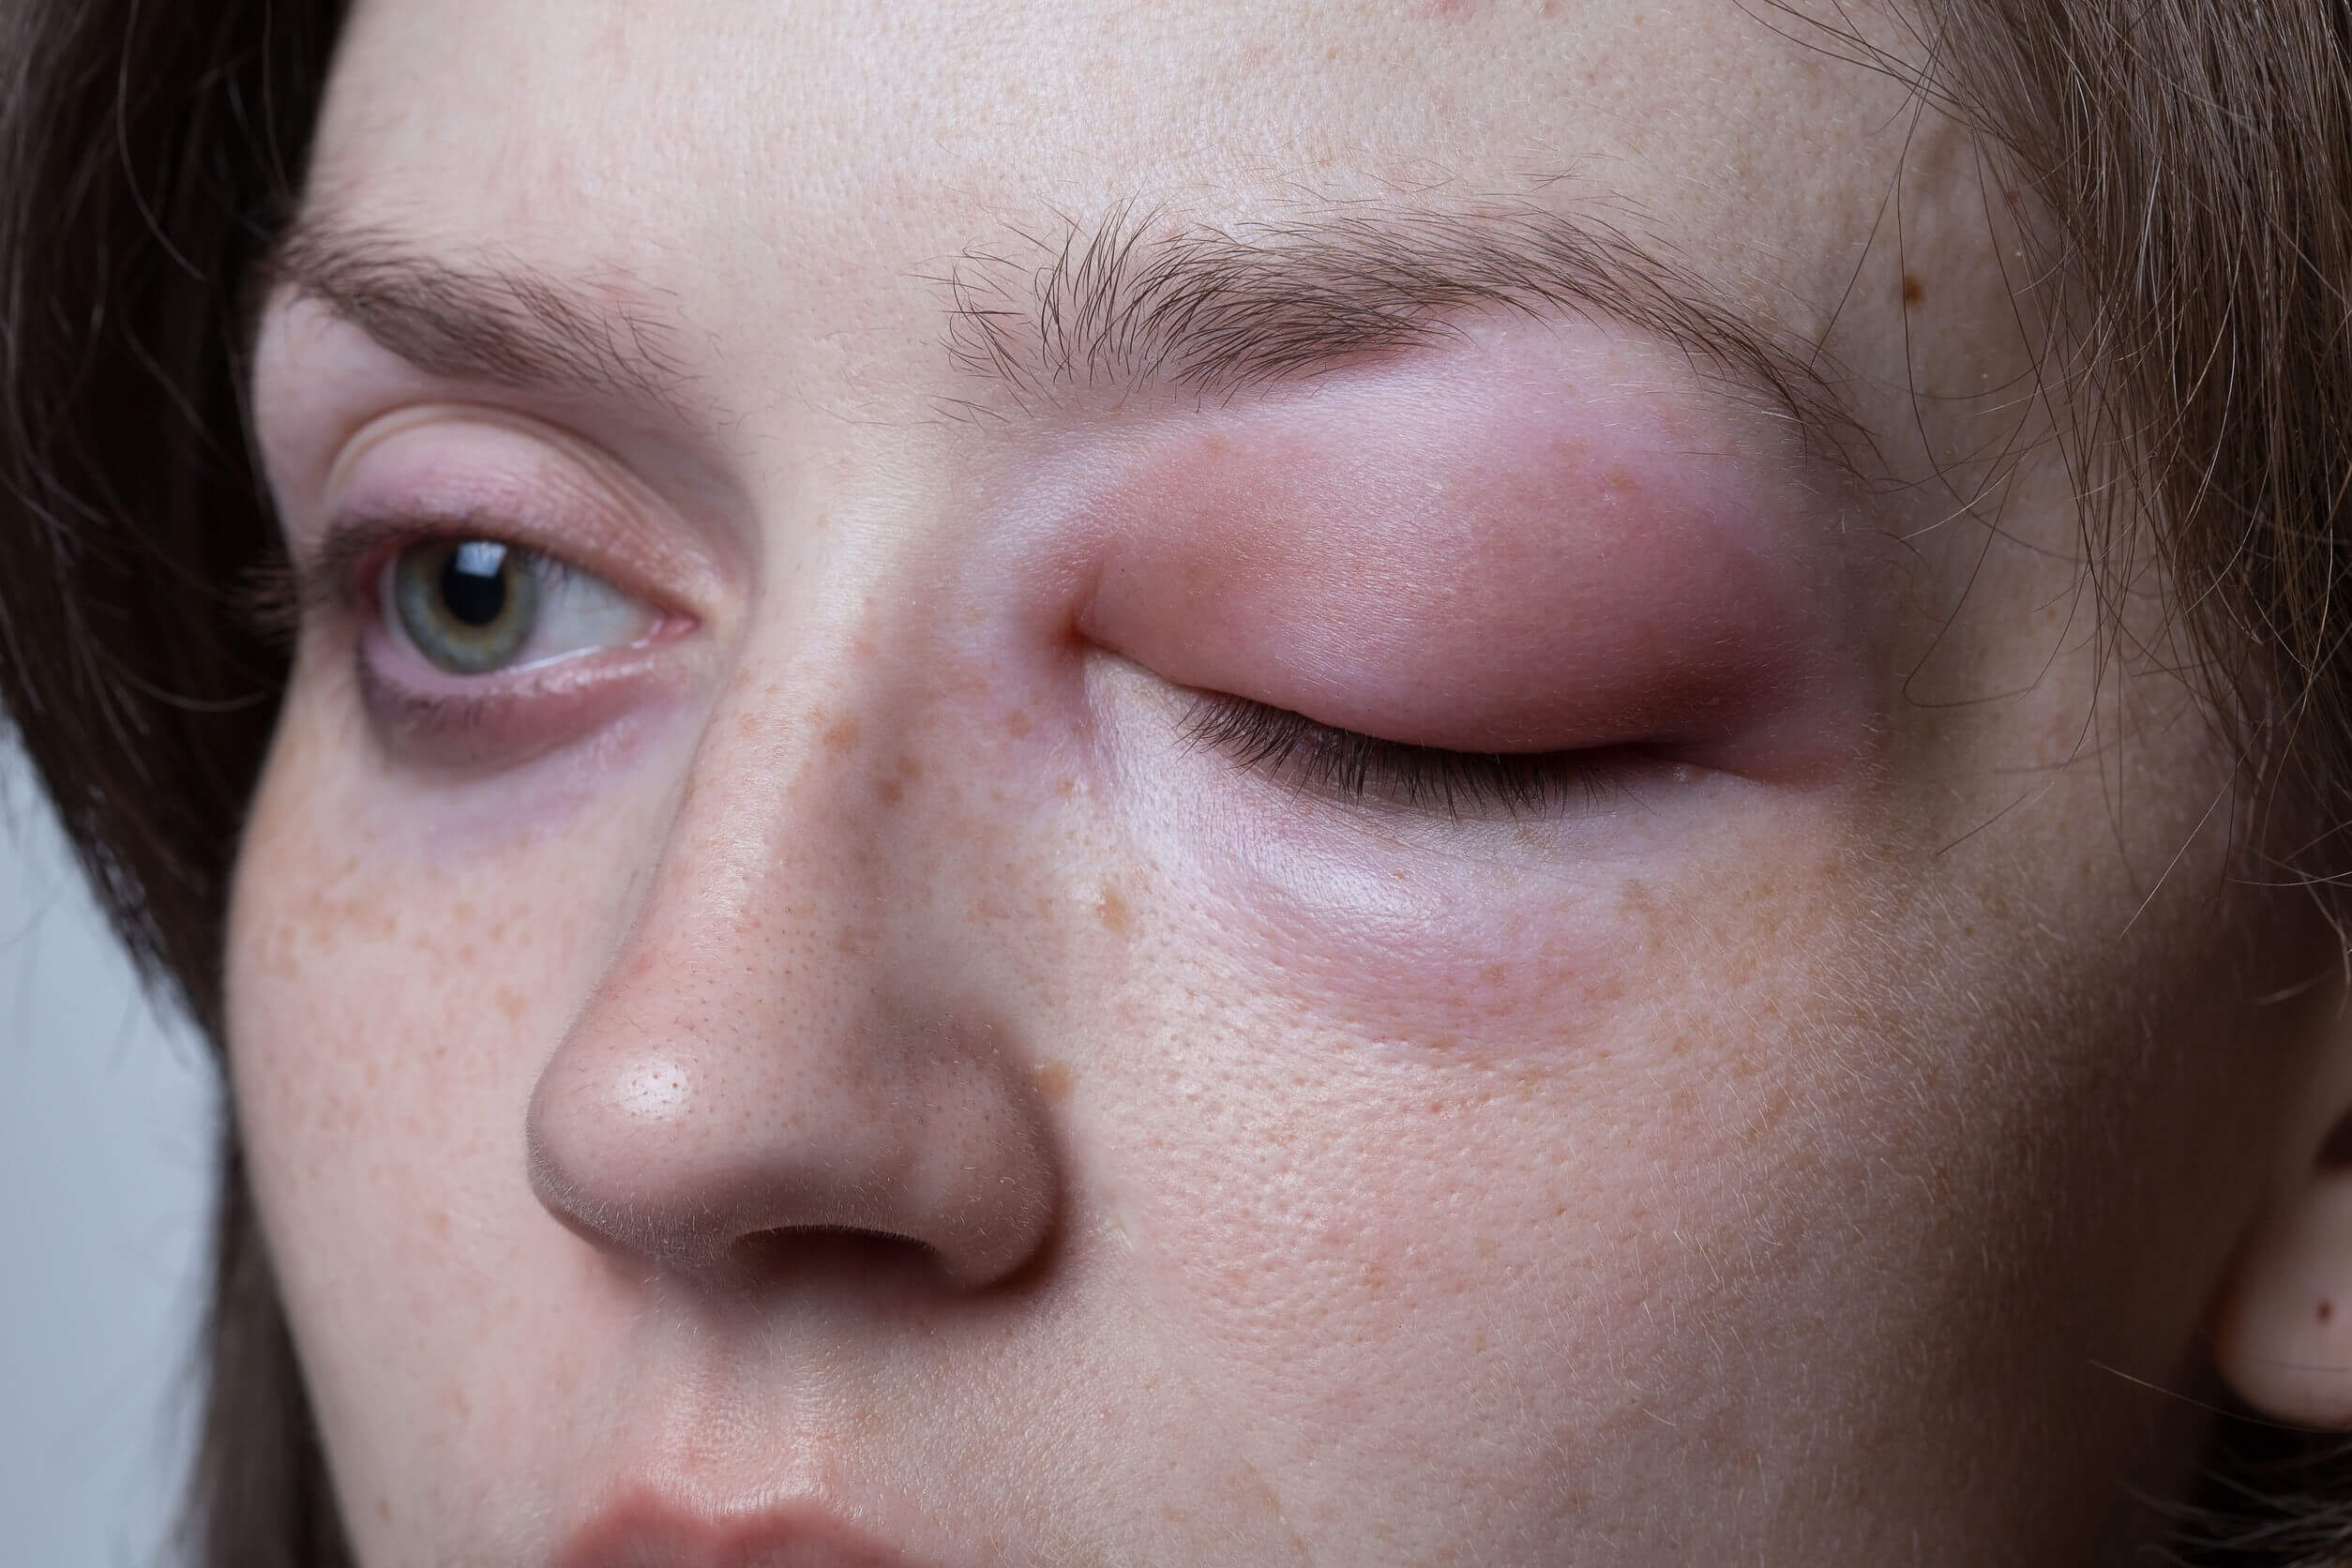 Allergic reactions can swell the eyes.